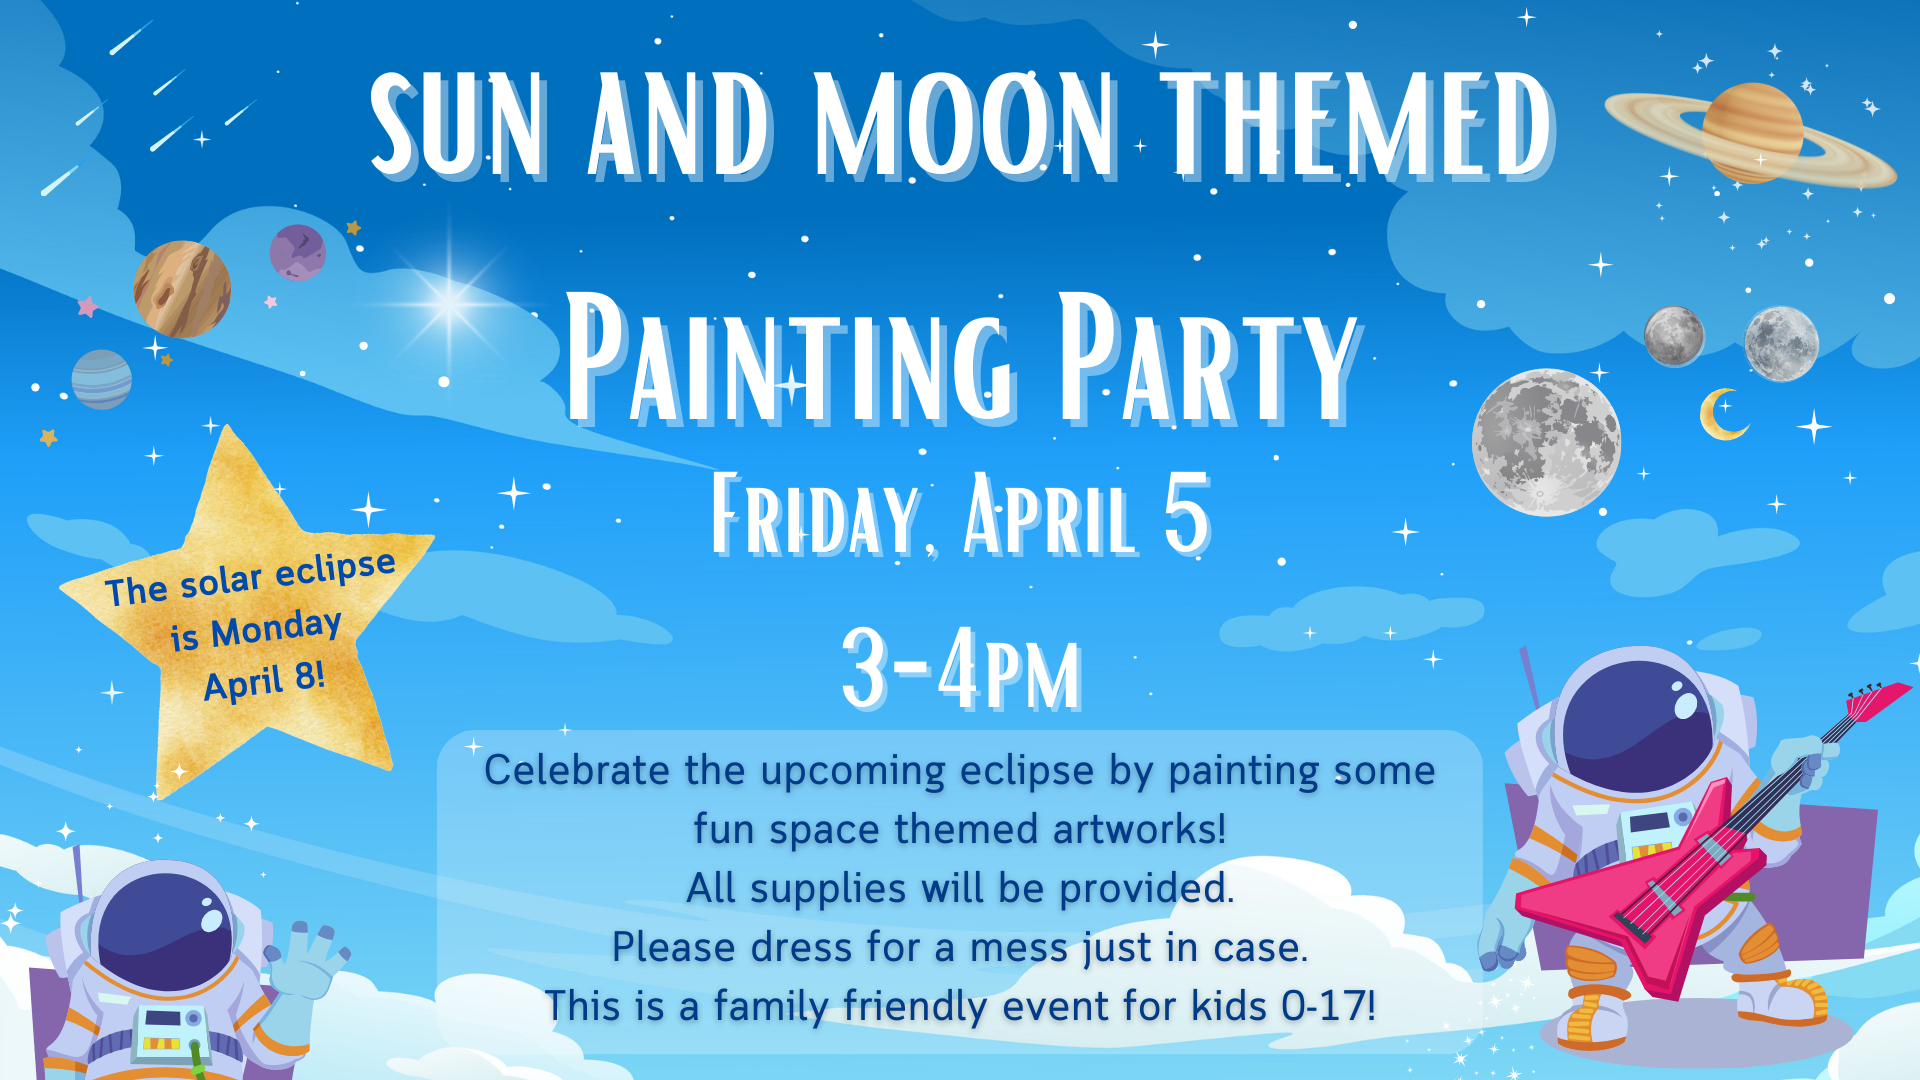 Sun and moon themed painting party for kids, Friday, April 5, 3-4 pm